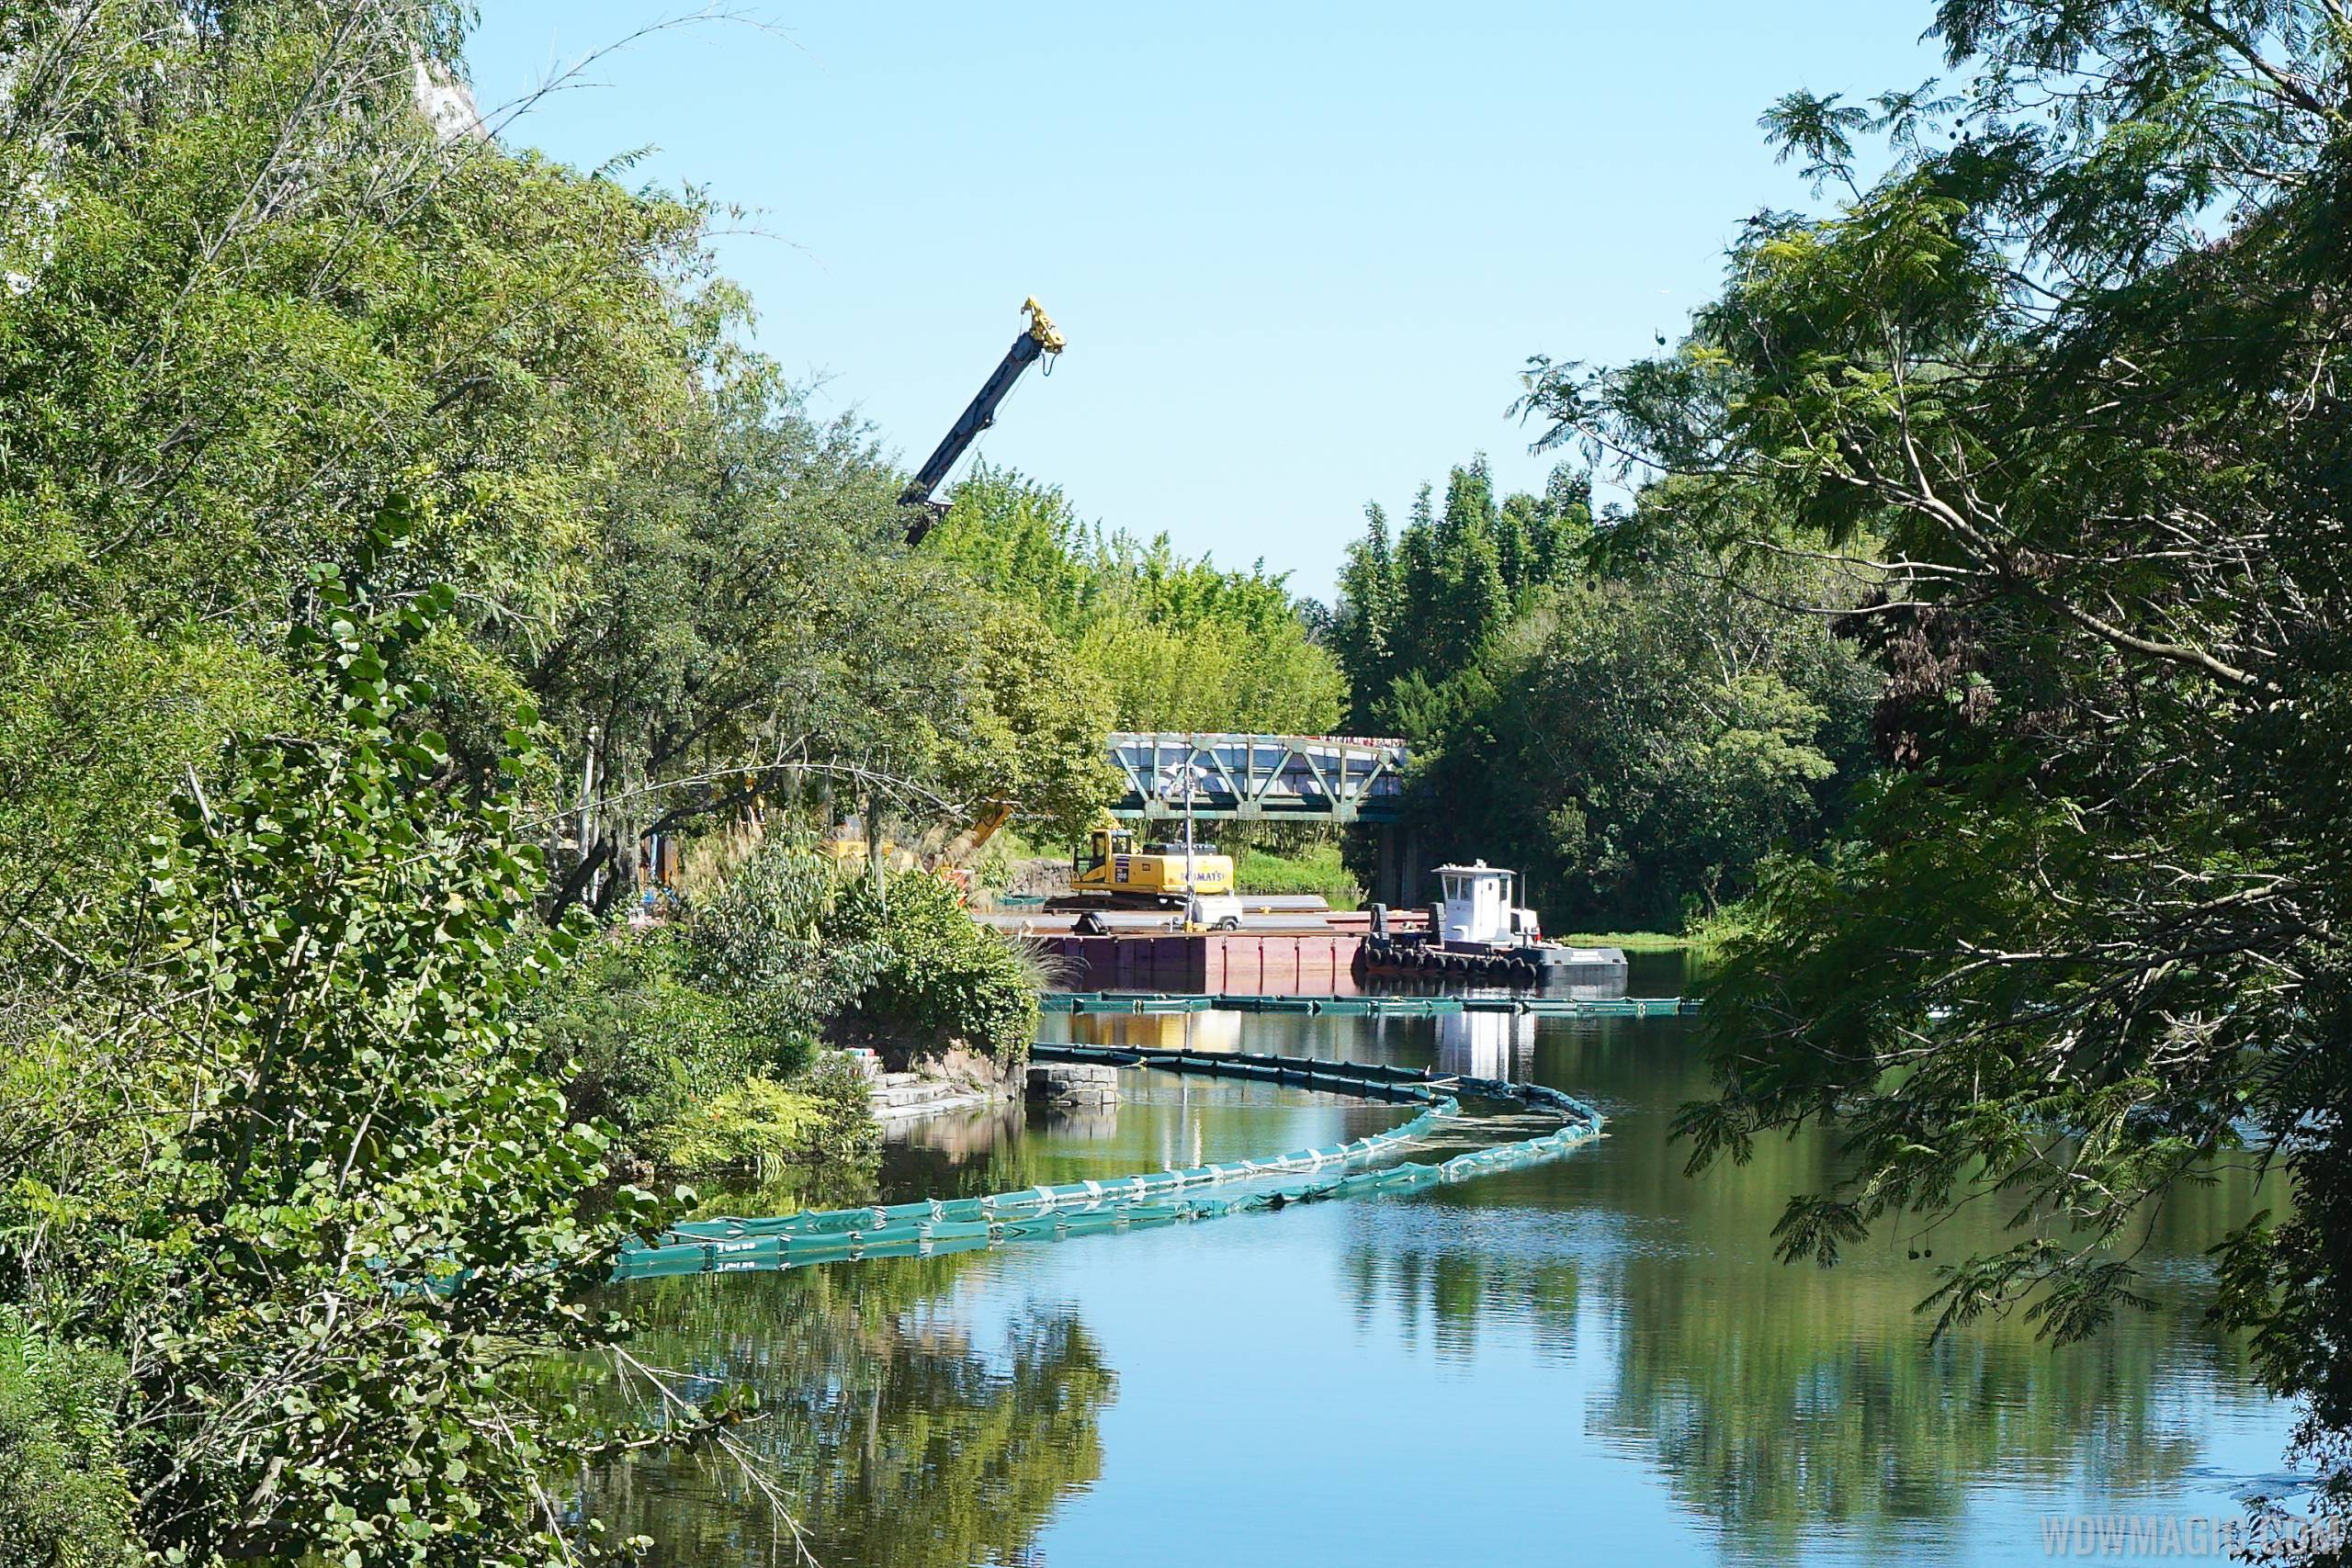 PHOTOS - A look at the Rivers of Light construction at Disney's Animal Kingdom